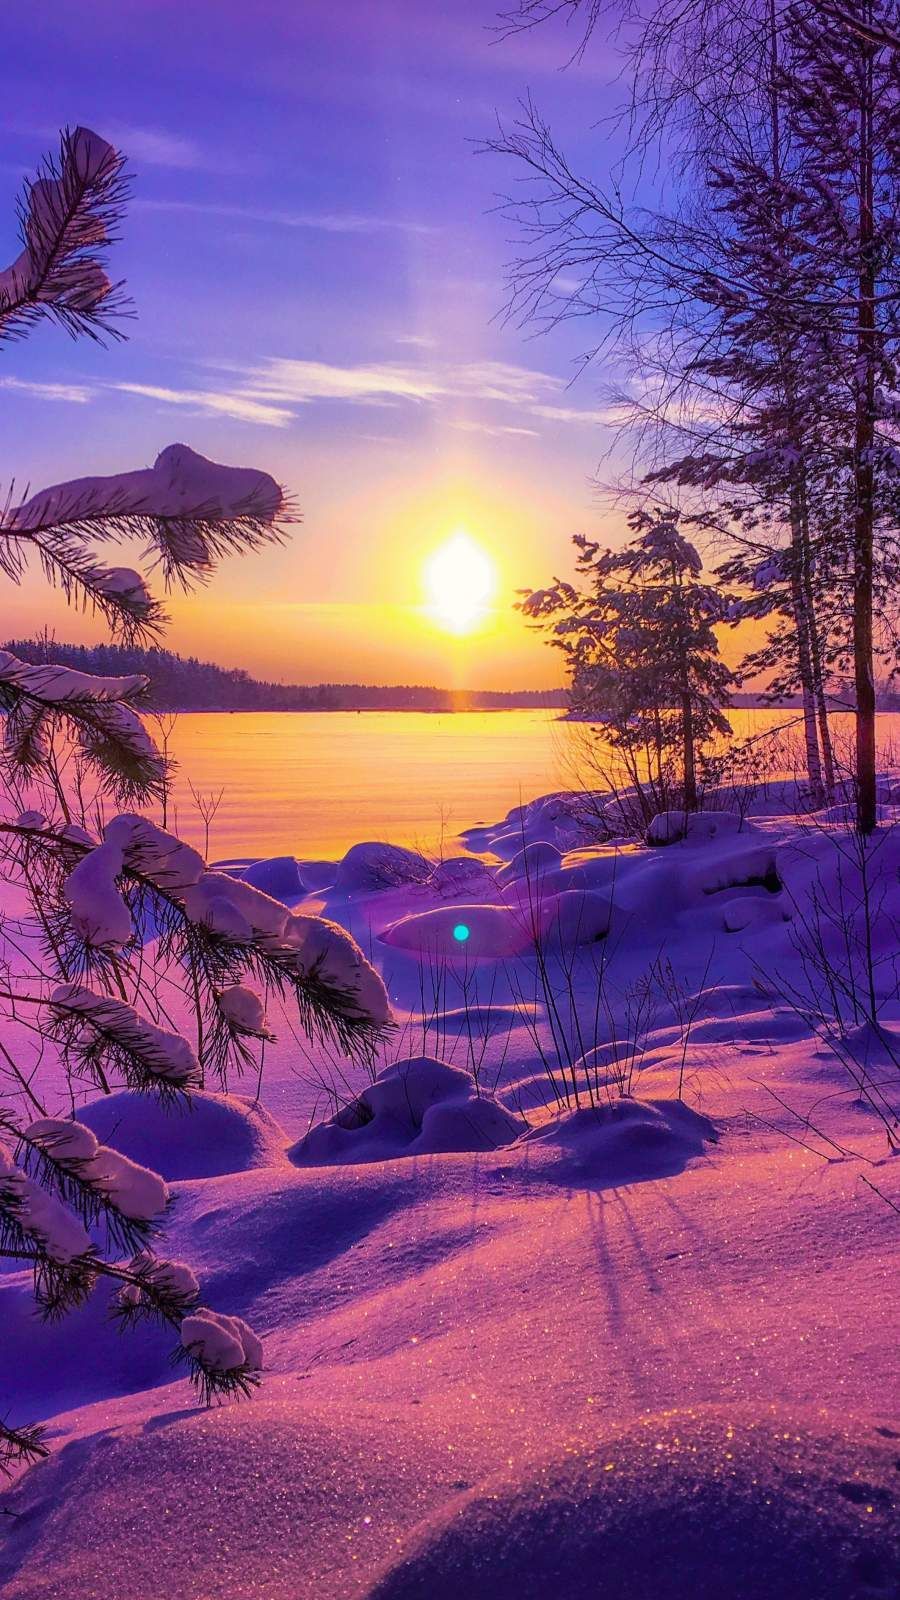 Colorful Winter Day iPhone Wallpaper. Winter scenery, Beautiful nature picture, Nature picture